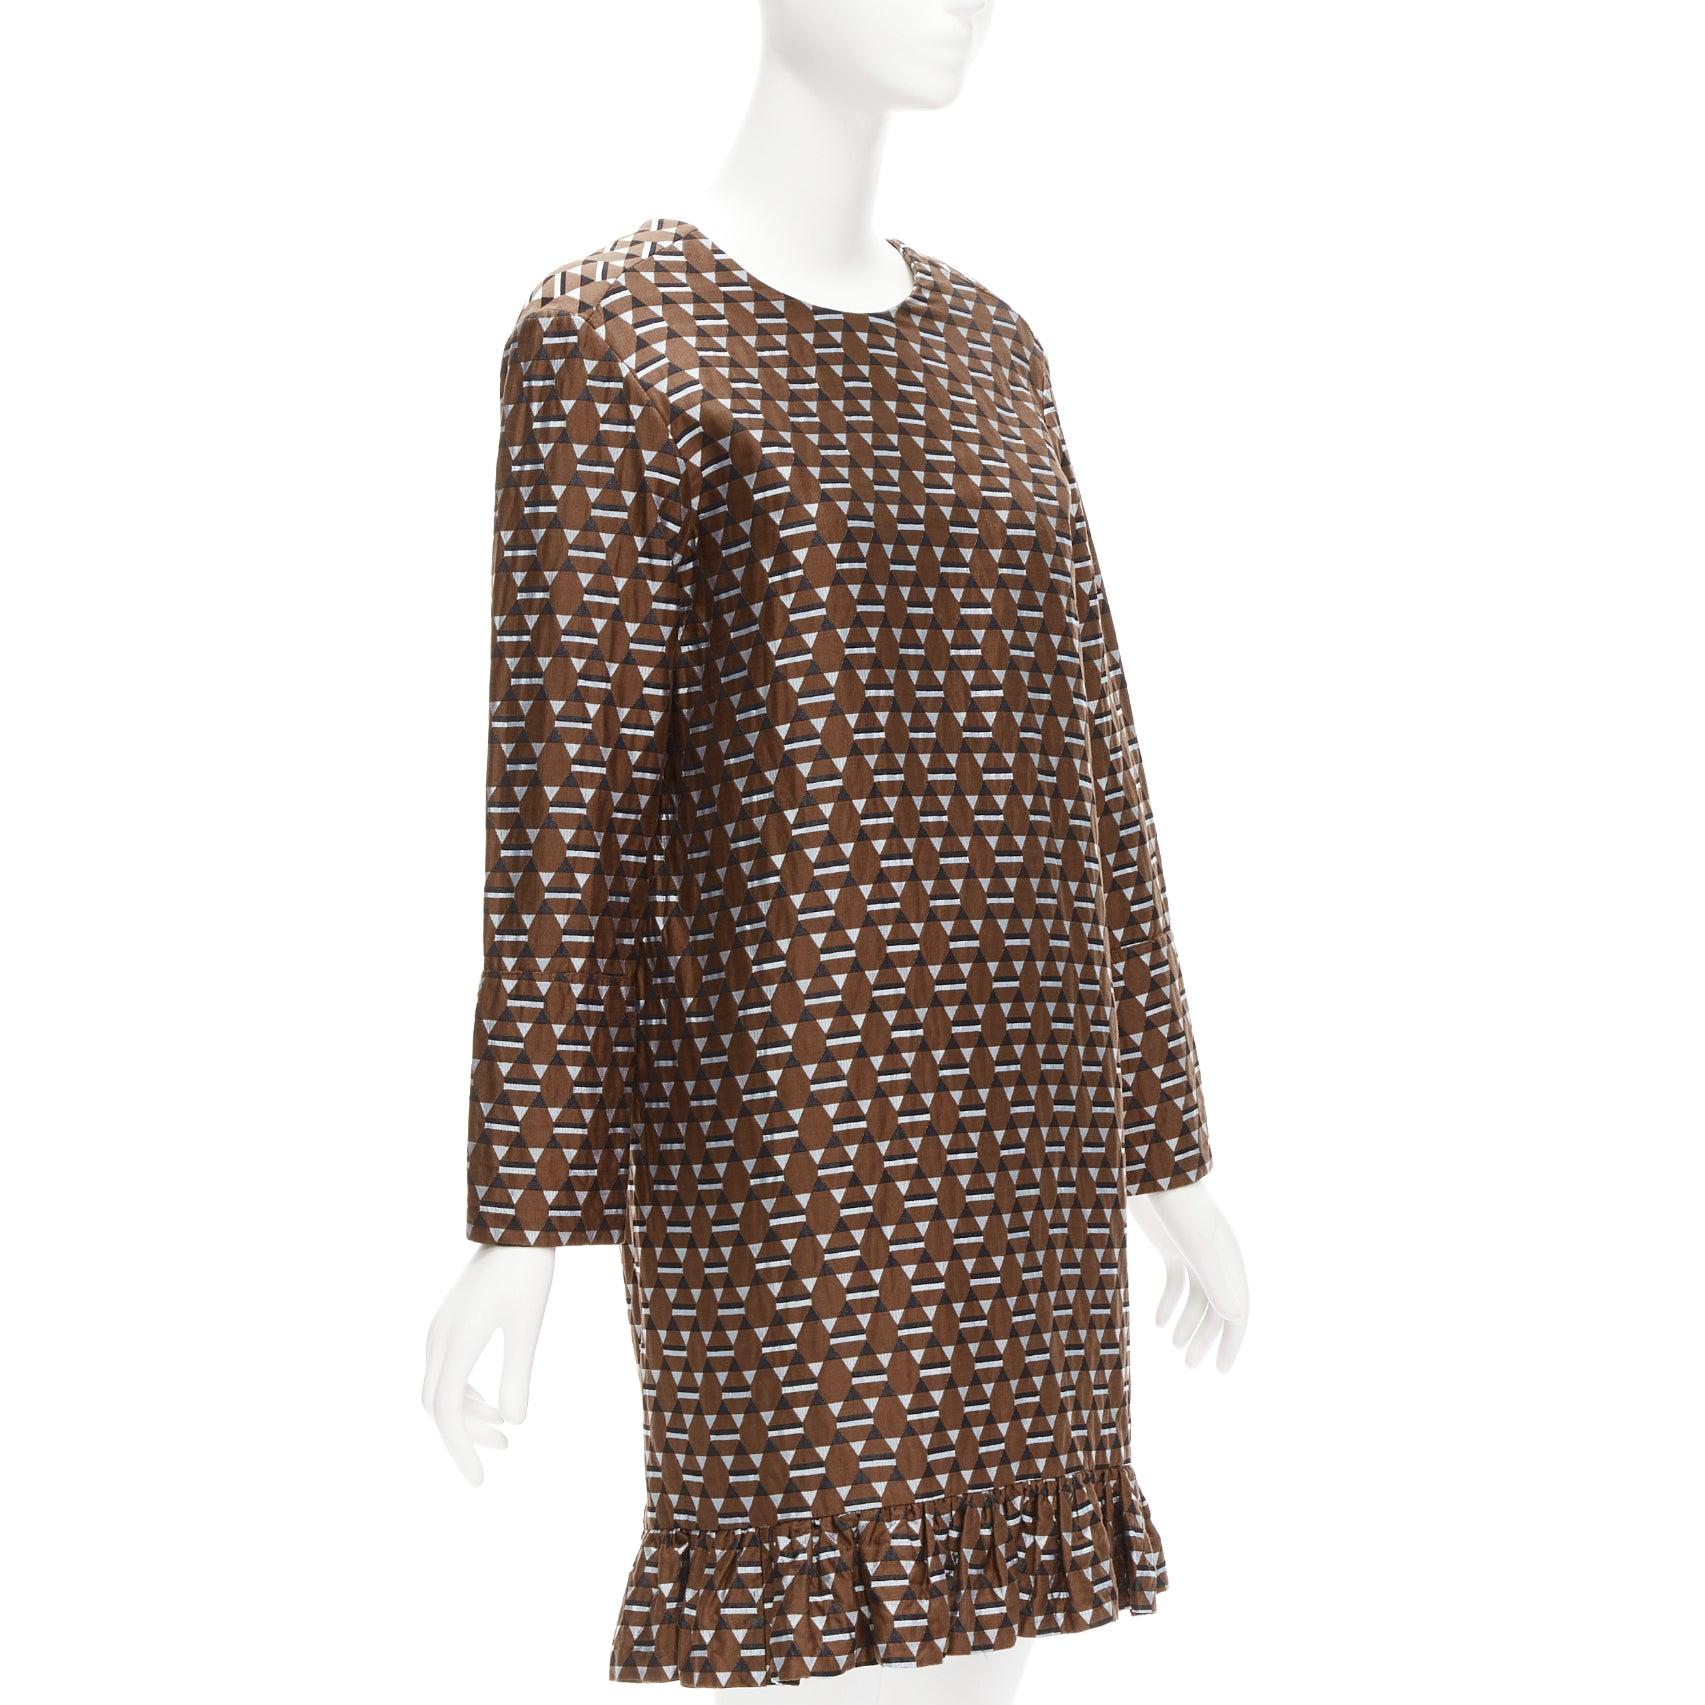 MARNI brown blue geometric jacquard frill hem dress IT38 XS
Reference: CELG/A00299
Brand: Marni
Material: Cotton, Blend
Color: Brown, Blue
Pattern: Geometric
Closure: Slip On
Made in: Italy

CONDITION:
Condition: Very good, this item was pre-owned